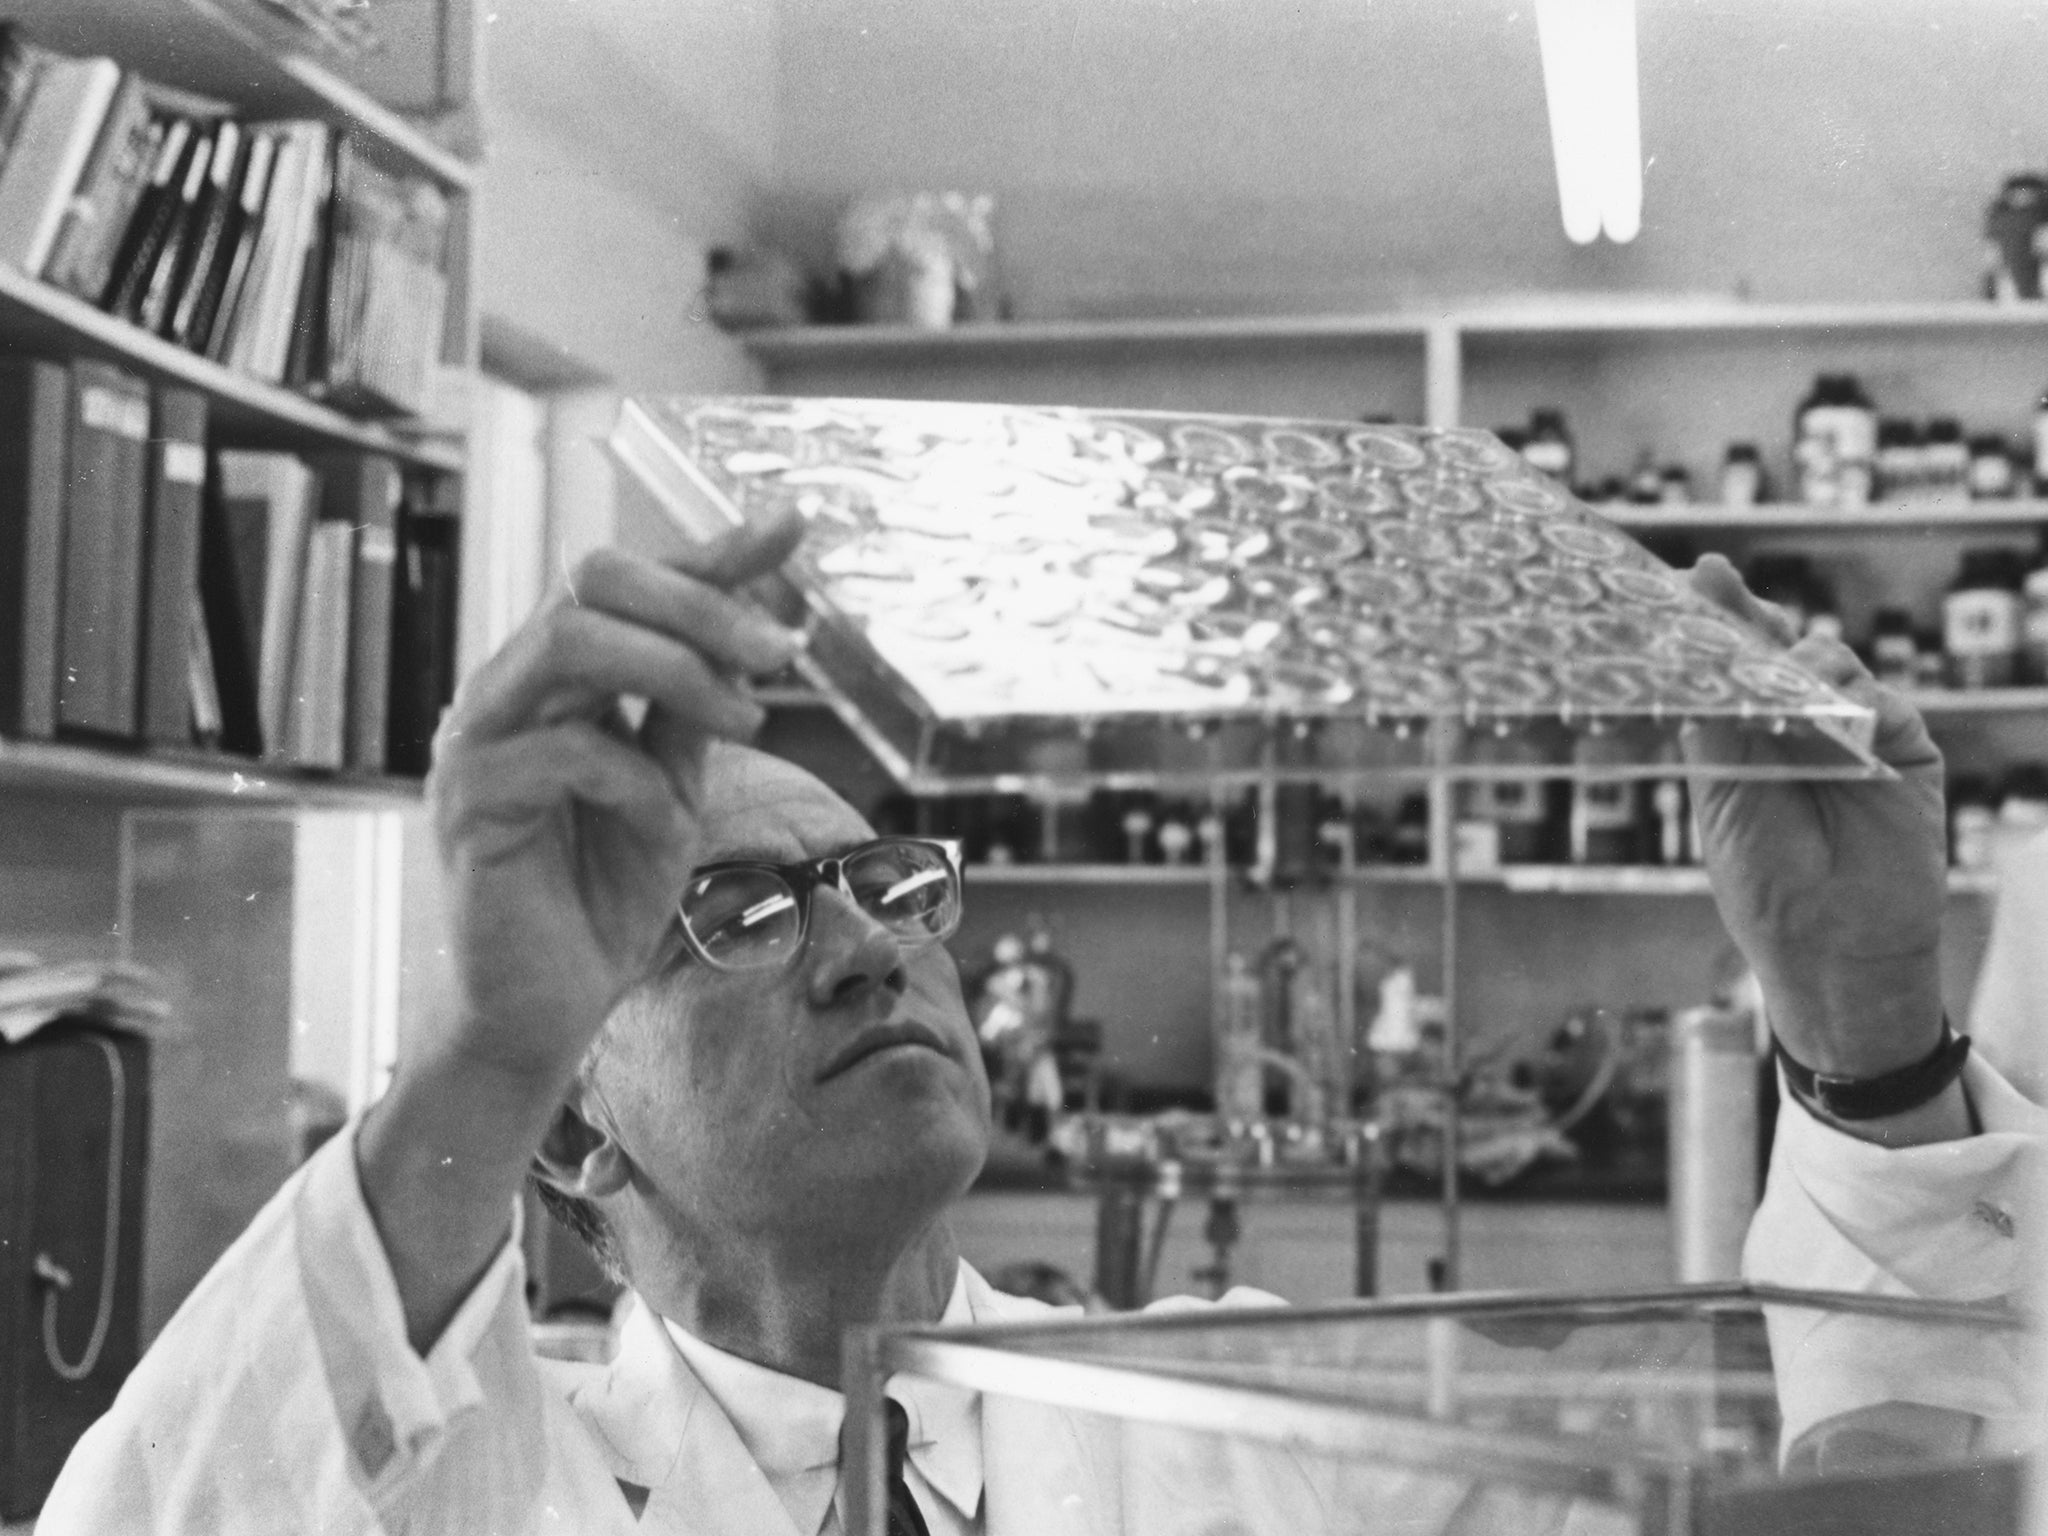 Dr Jonas Salk studying slides in his laboratory, following the invention of his polio vaccine in 1954